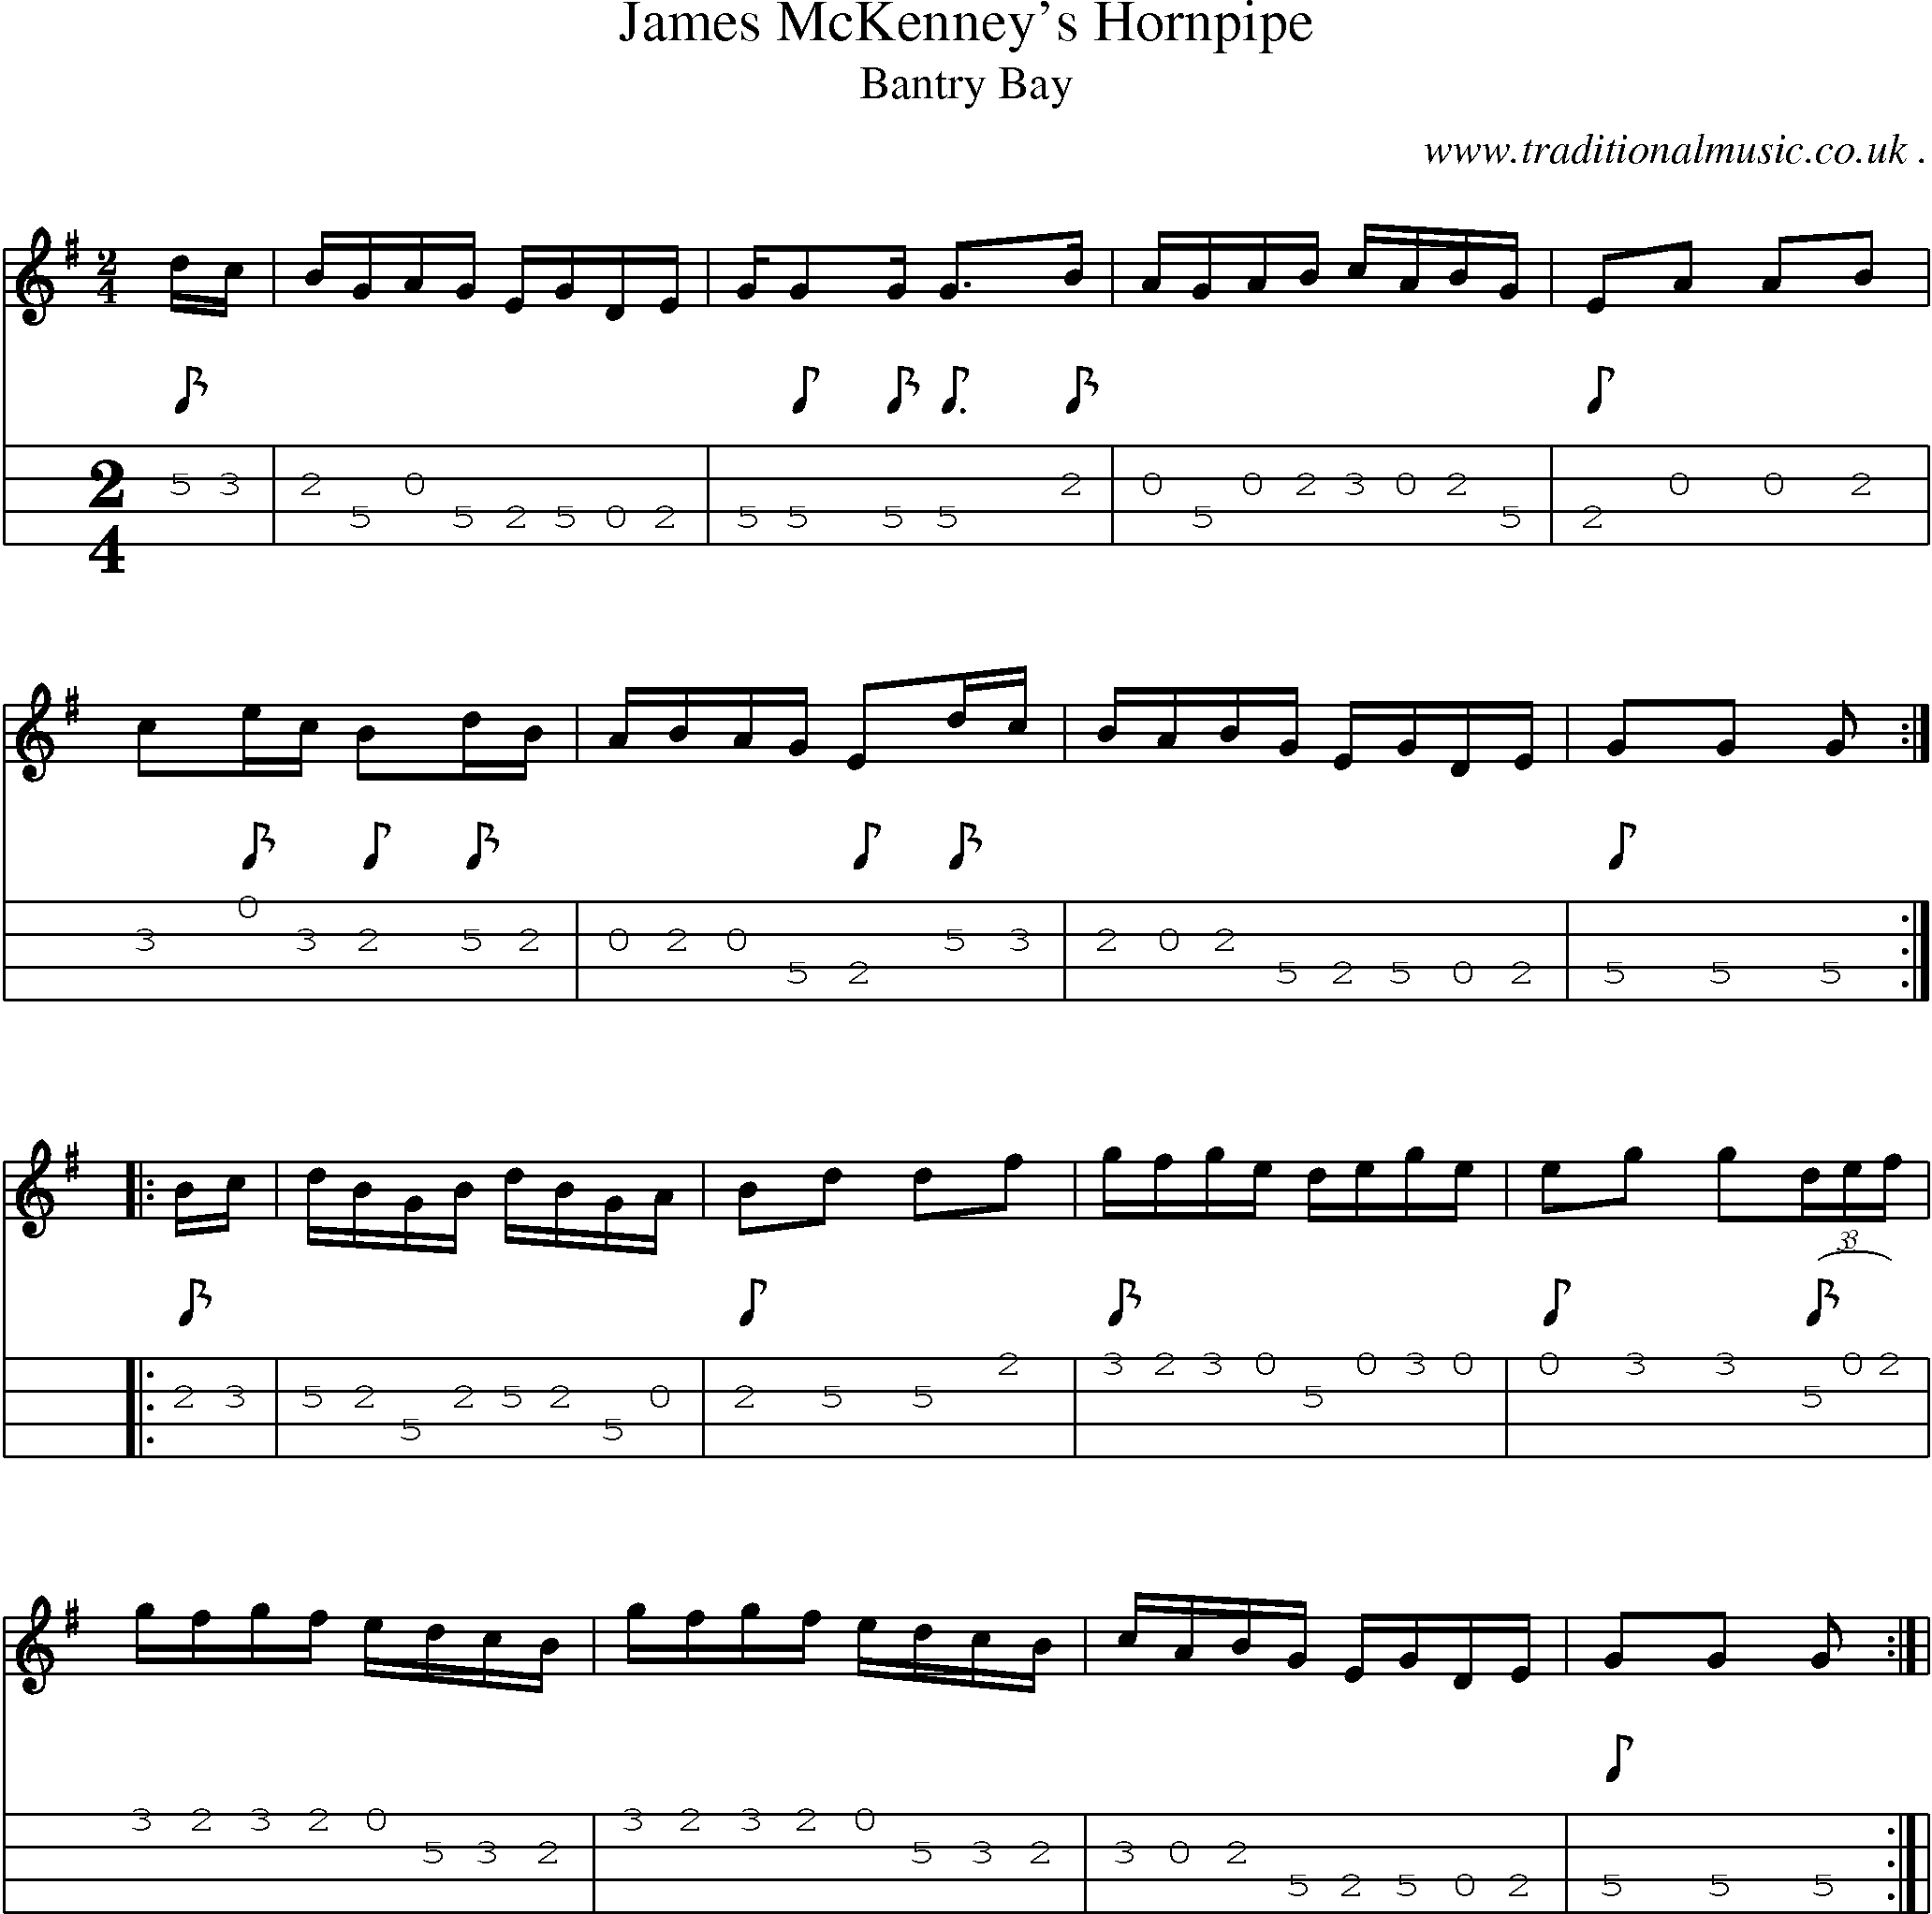 Sheet-Music and Mandolin Tabs for James Mckenneys Hornpipe